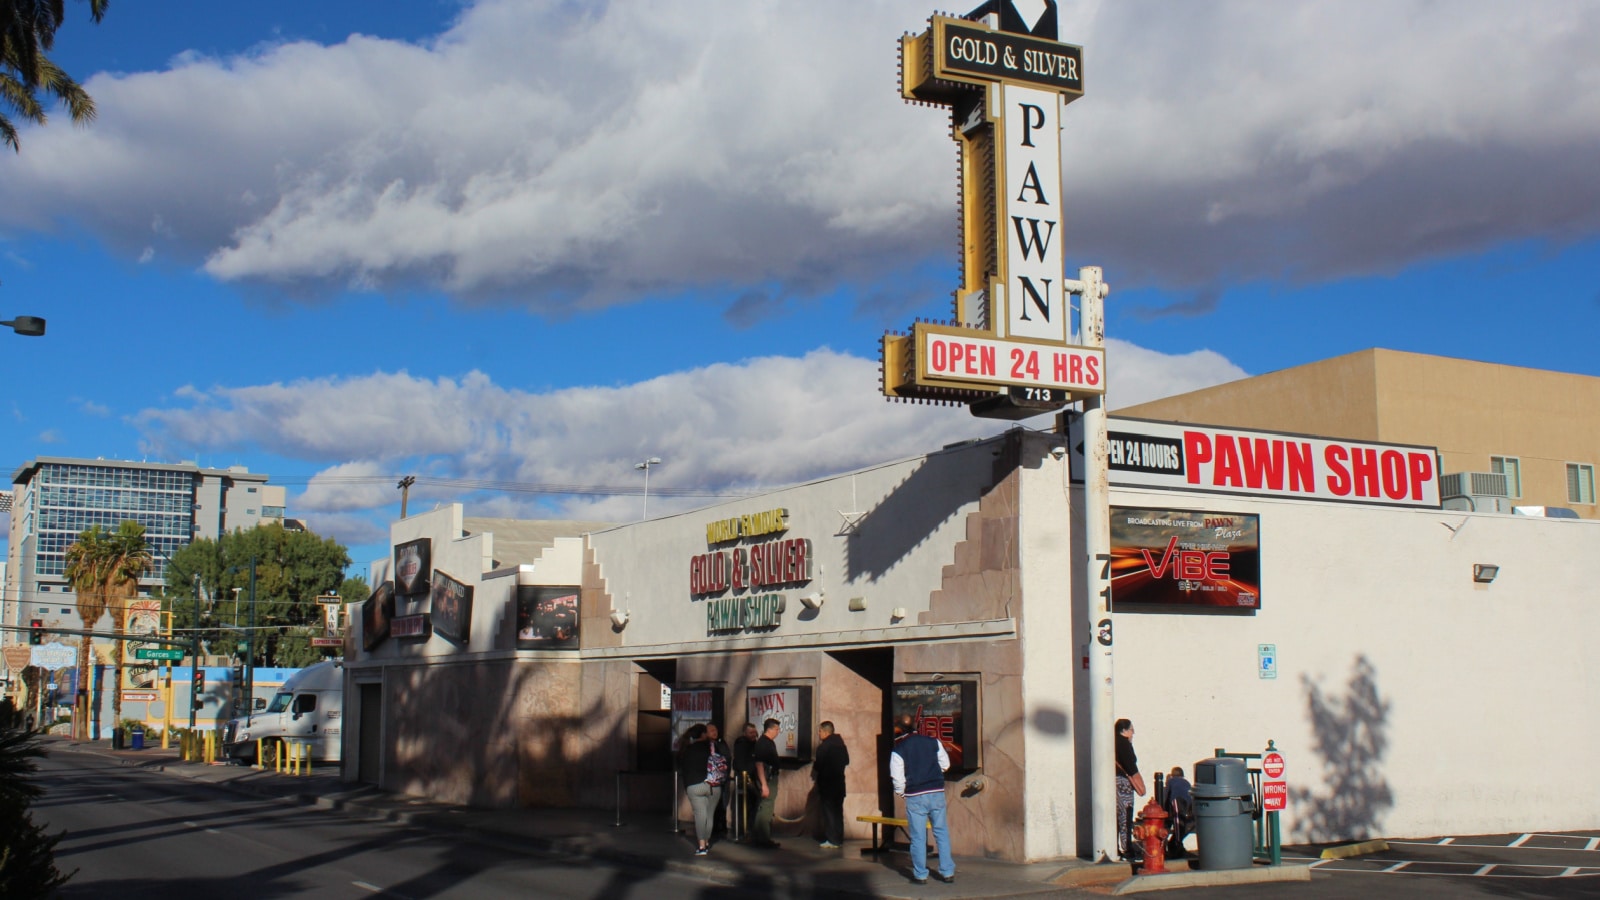 <p>The pawn shop from Pawn Stars resulted in quite a few disappointed visitors. One traveler stated, “We got corralled through the store, and there was literally nothing worth a second look there. Waste of time.”  A Vegas local confirmed this sentiment and said, “I never do the tourist thing myself. But I got dragged there with family…you wait in this stupid line, get hustled about and then that’s it. Pointless waste of time.”</p>